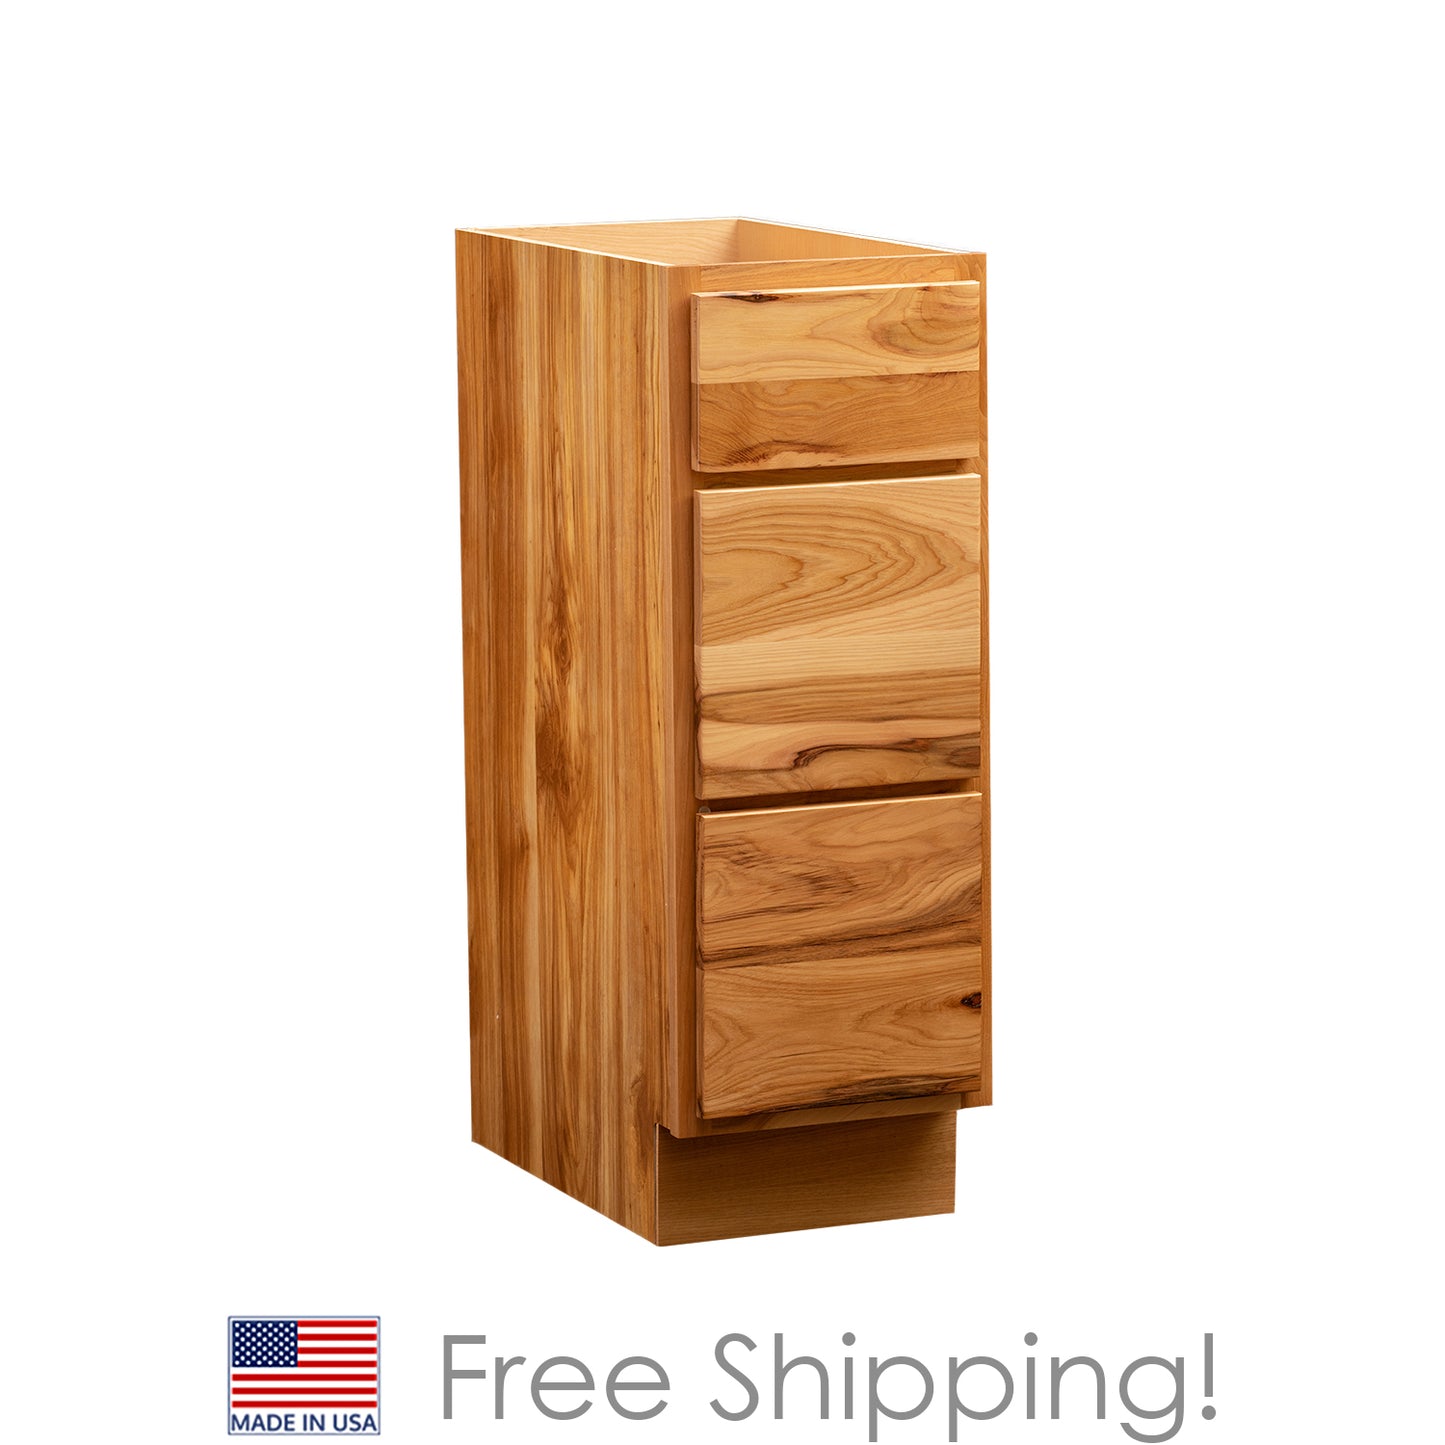 Quicklock RTA (Ready-to-Assemble) Rustic Hickory 3 Drawer Vanity Base Drawers Cabinet- 12"W